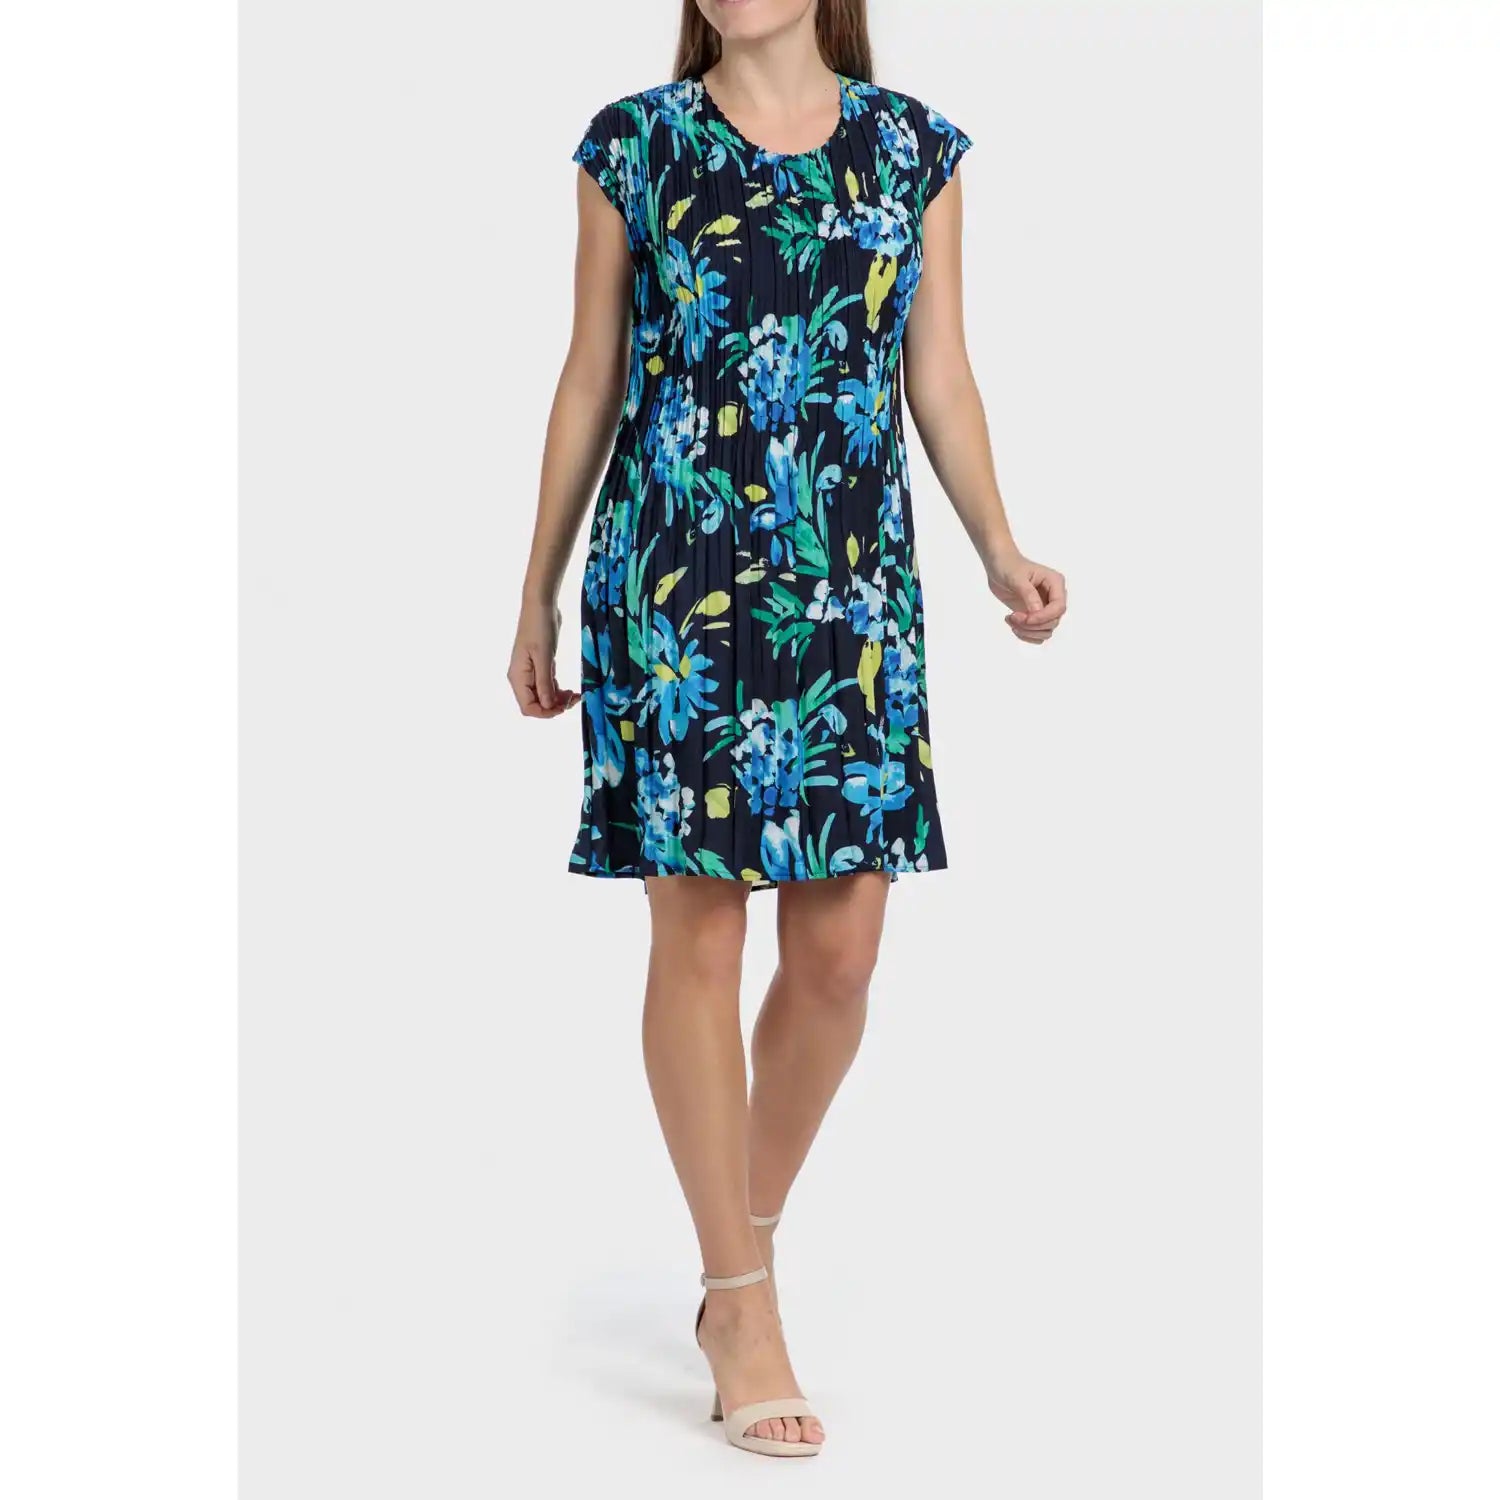 Punt Roma Pleated Printed Dress - Blue / Navy 2 Shaws Department Stores